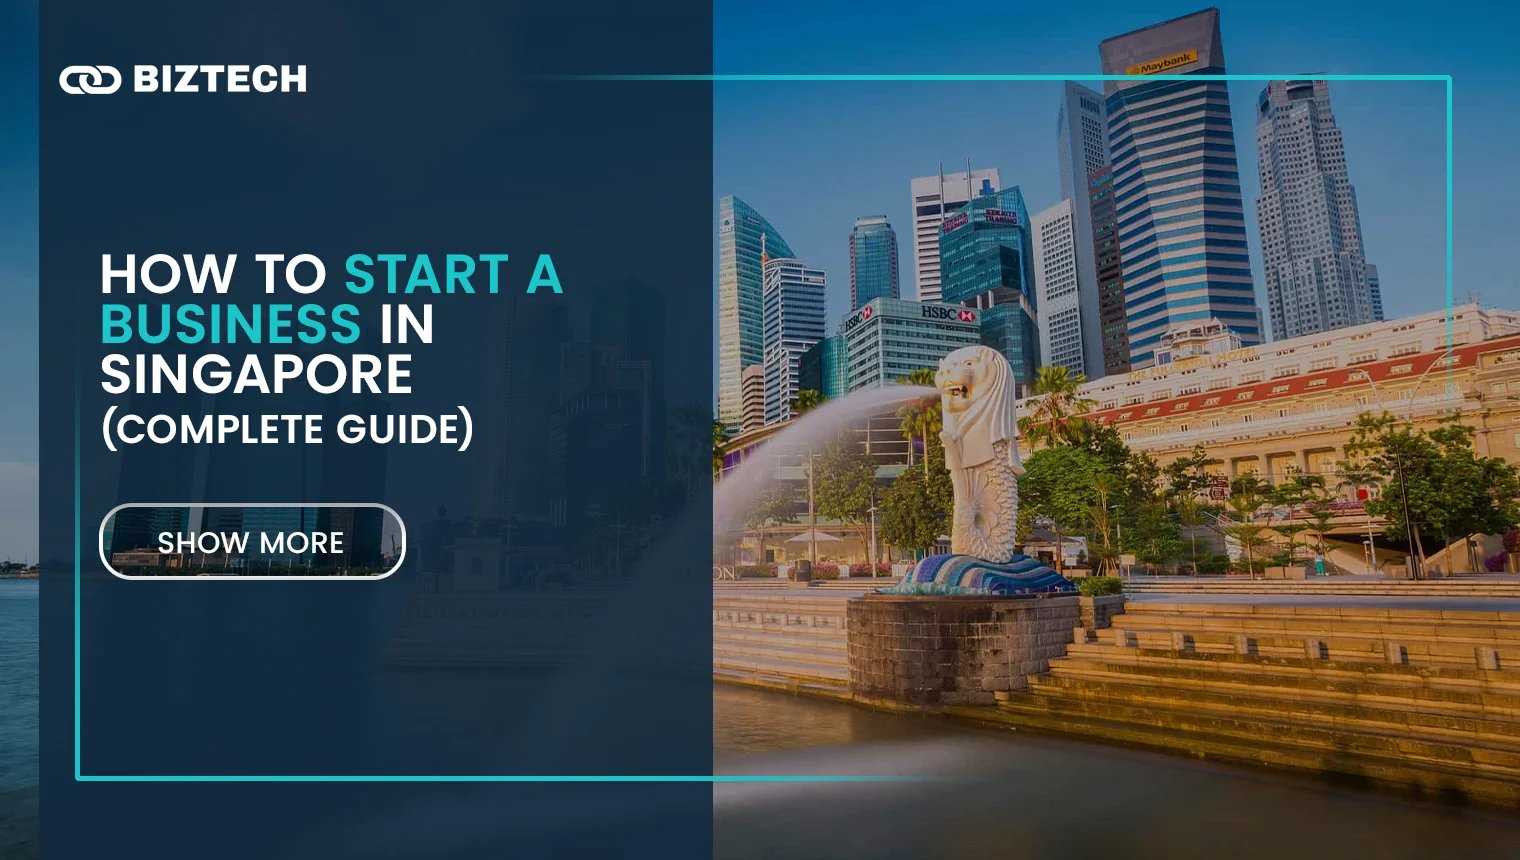 How To Start A Business in Singapore (Complete Guide)